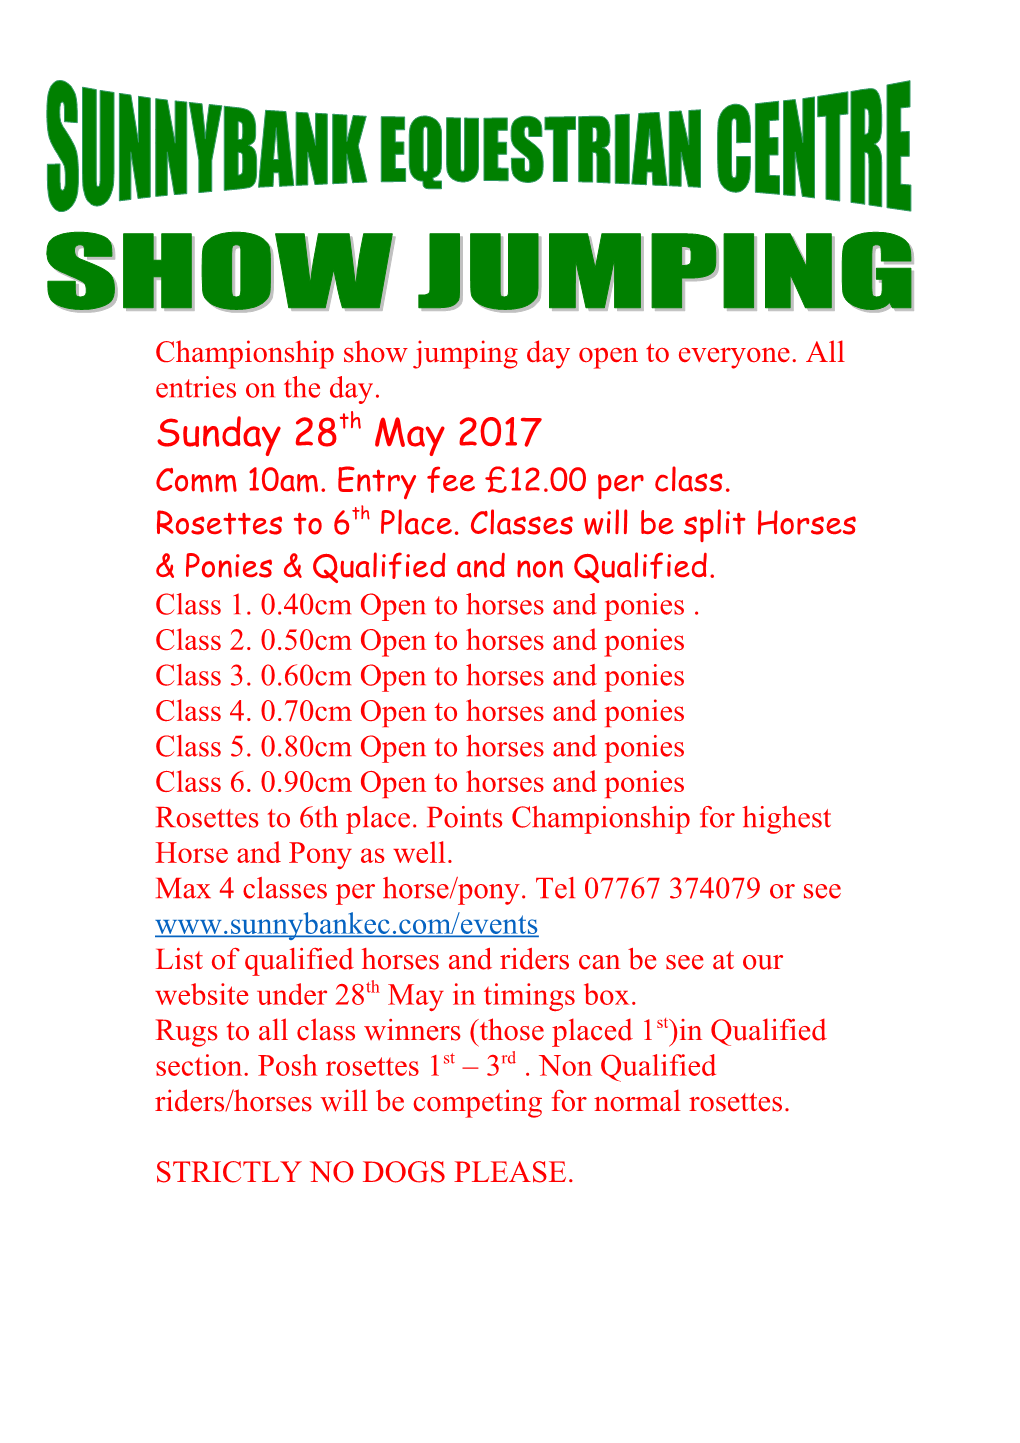 Championship Show Jumping Day Open to Everyone. All Entries on the Day